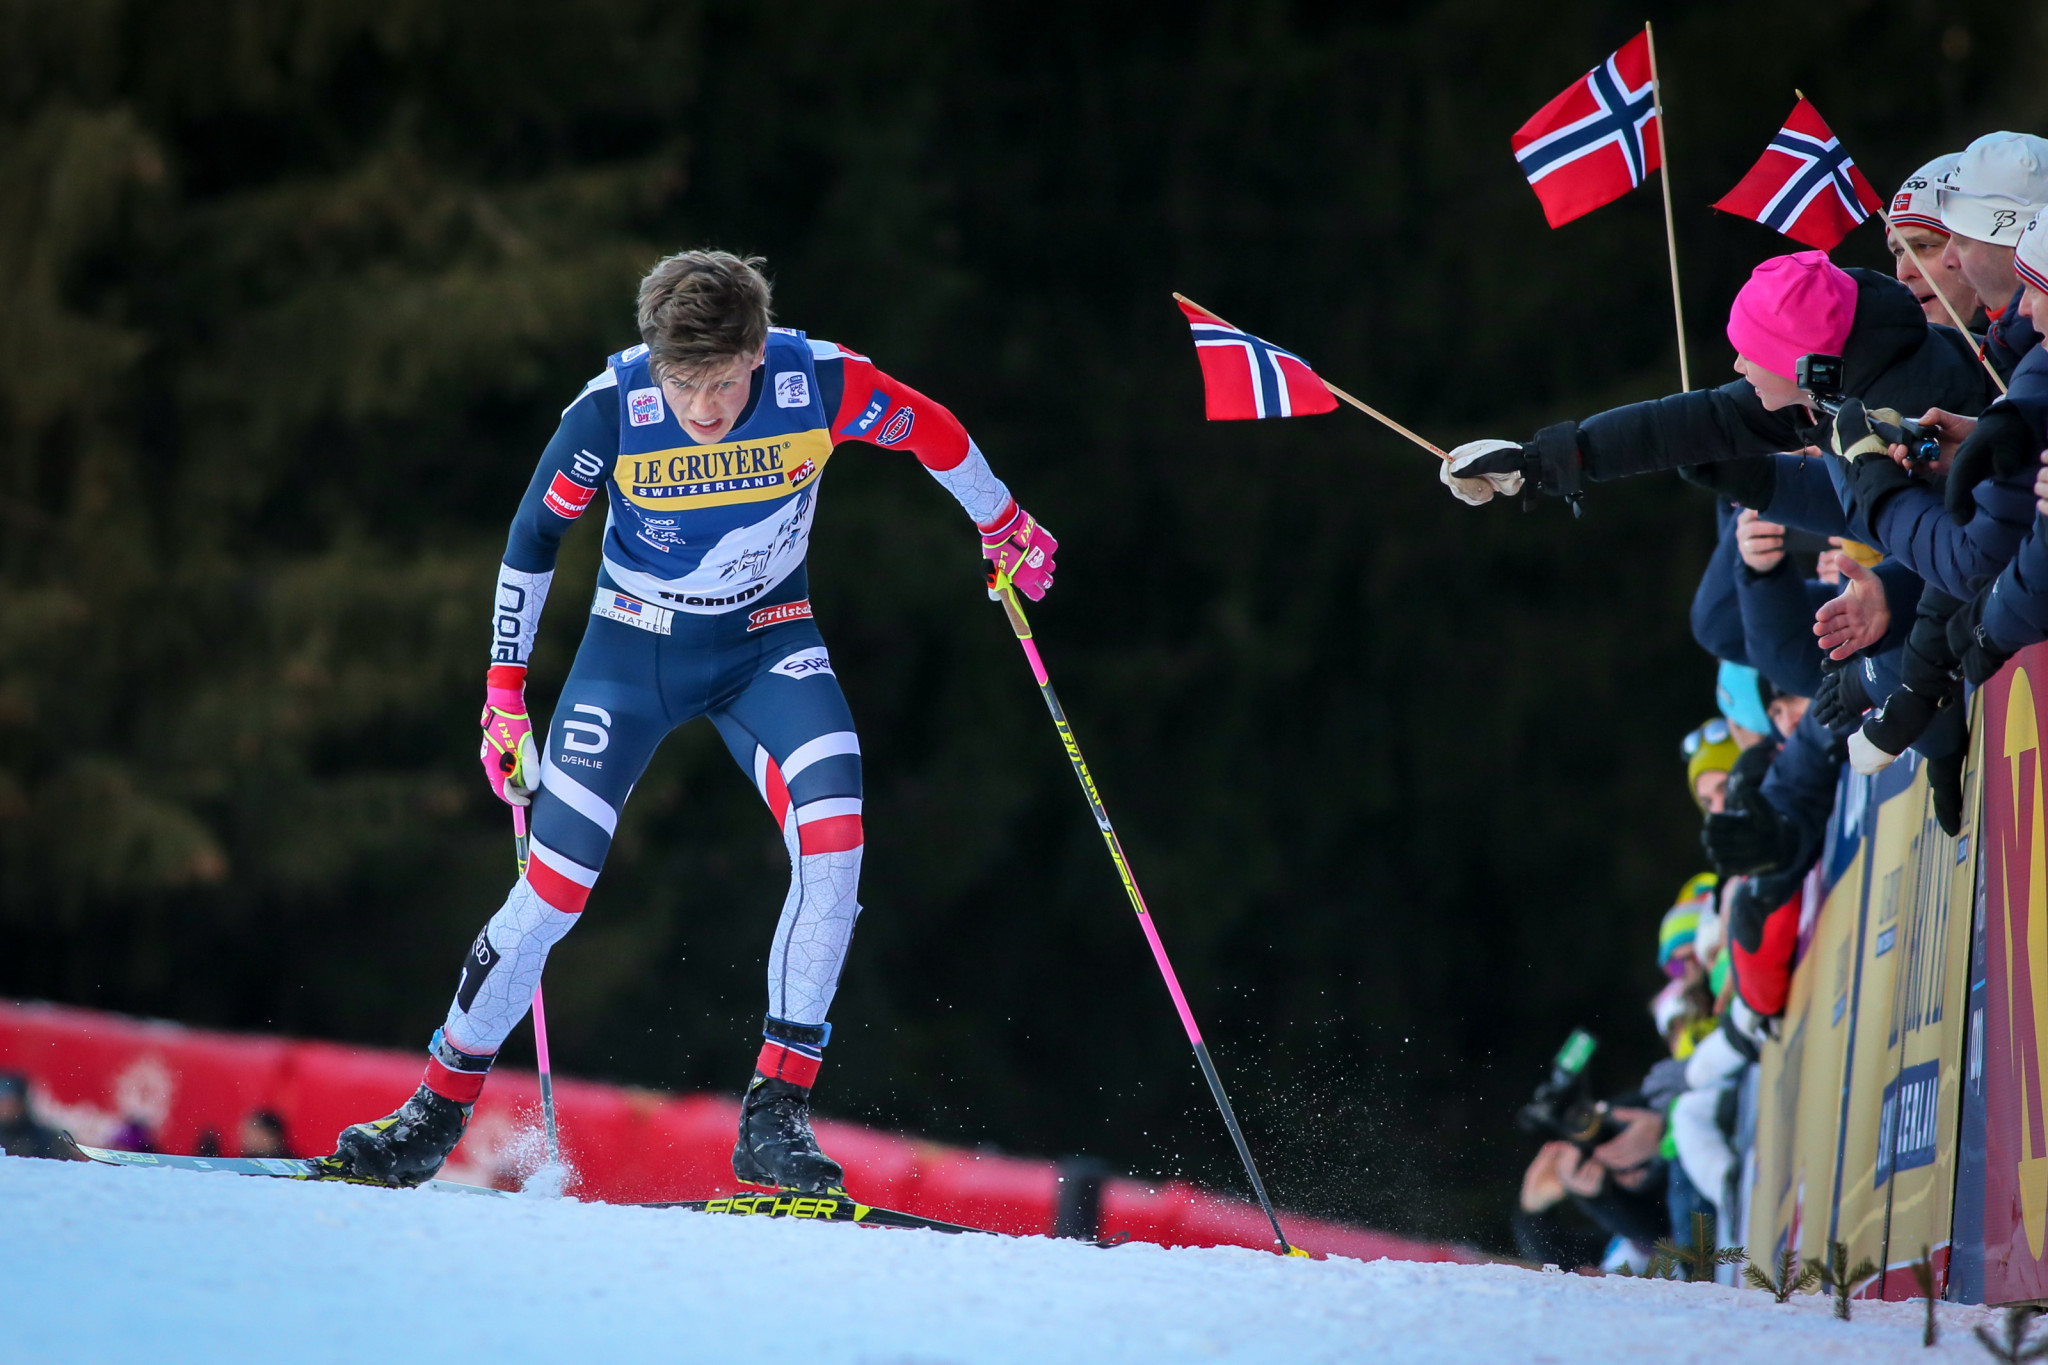 Johannes Høsflot Klæbo will be among the favourites in the men's events at the FIS Cross-Country World Cup in Lahti ©Getty Images